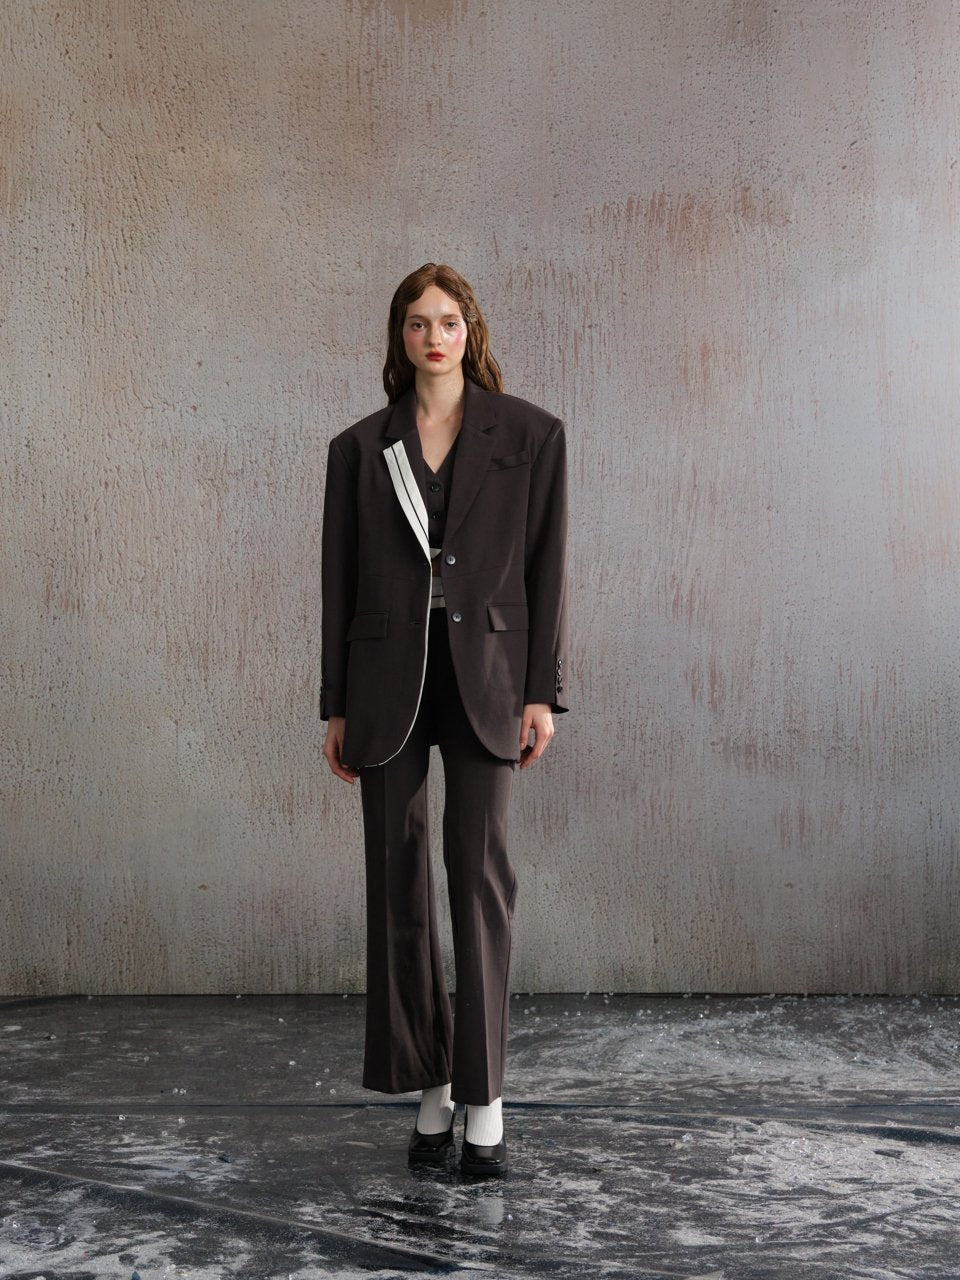 ARTE PURA White Trimmed Gray Suit | MADA IN CHINA